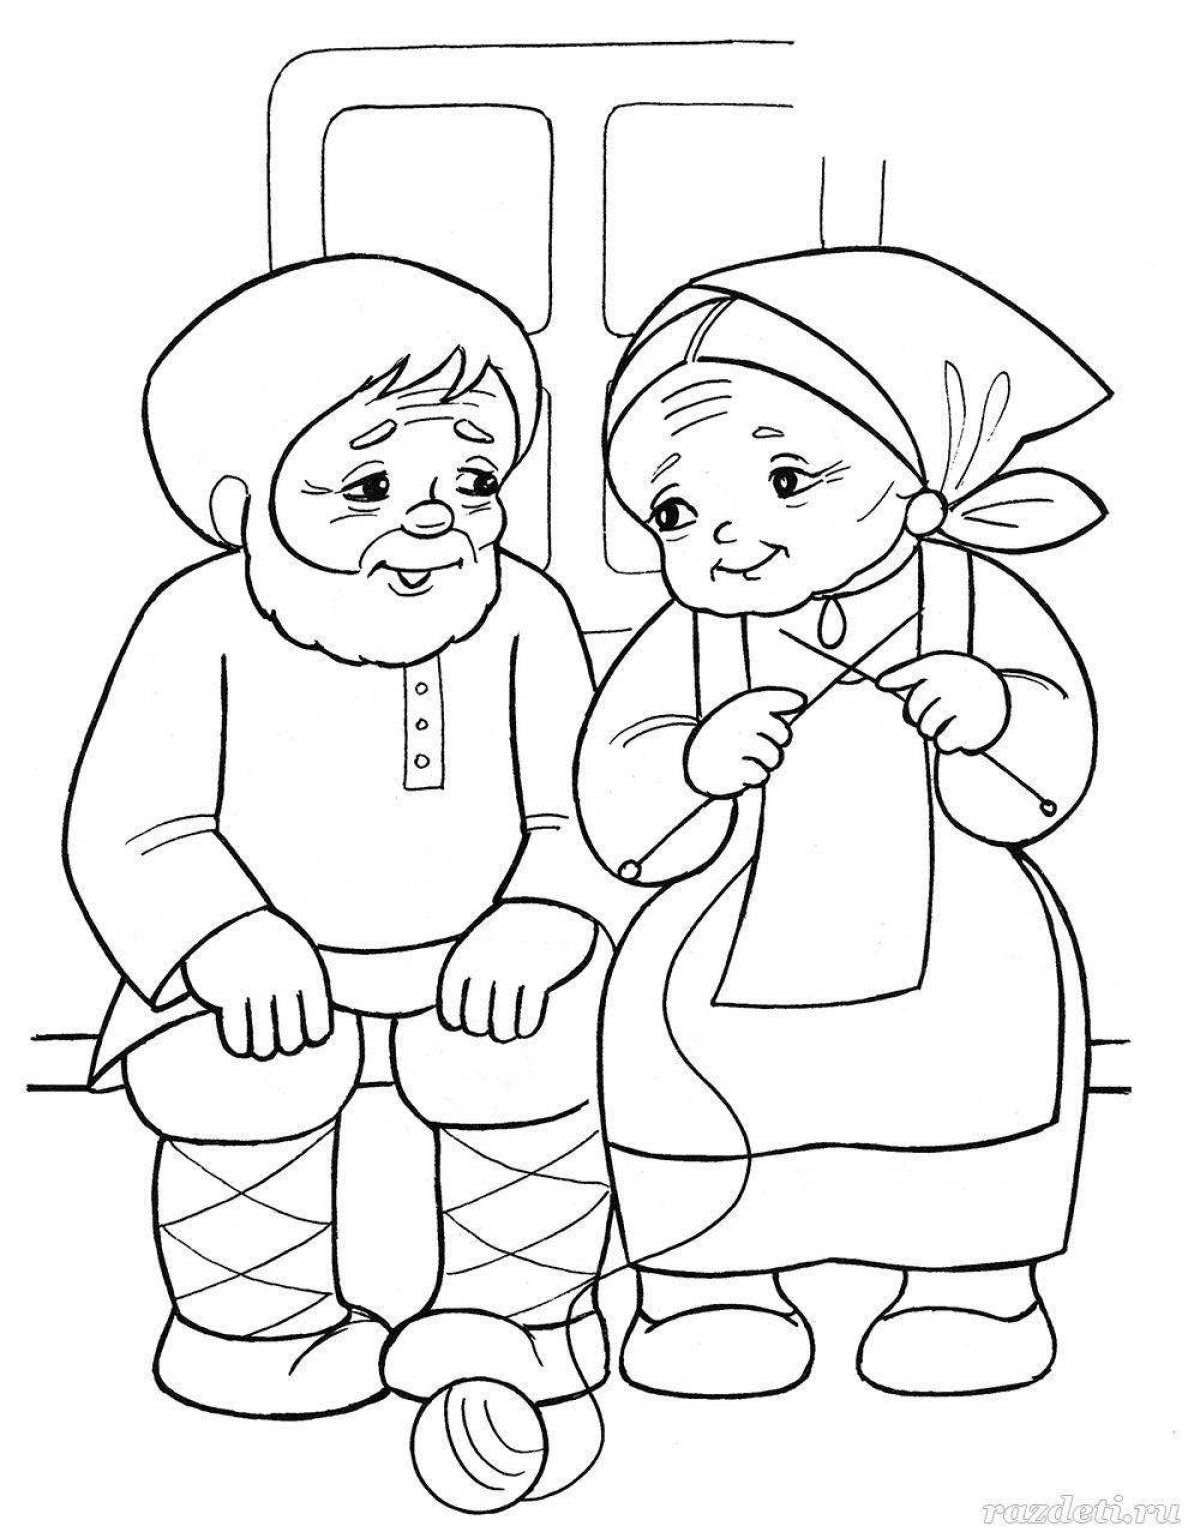 Coloring book playful grandfather